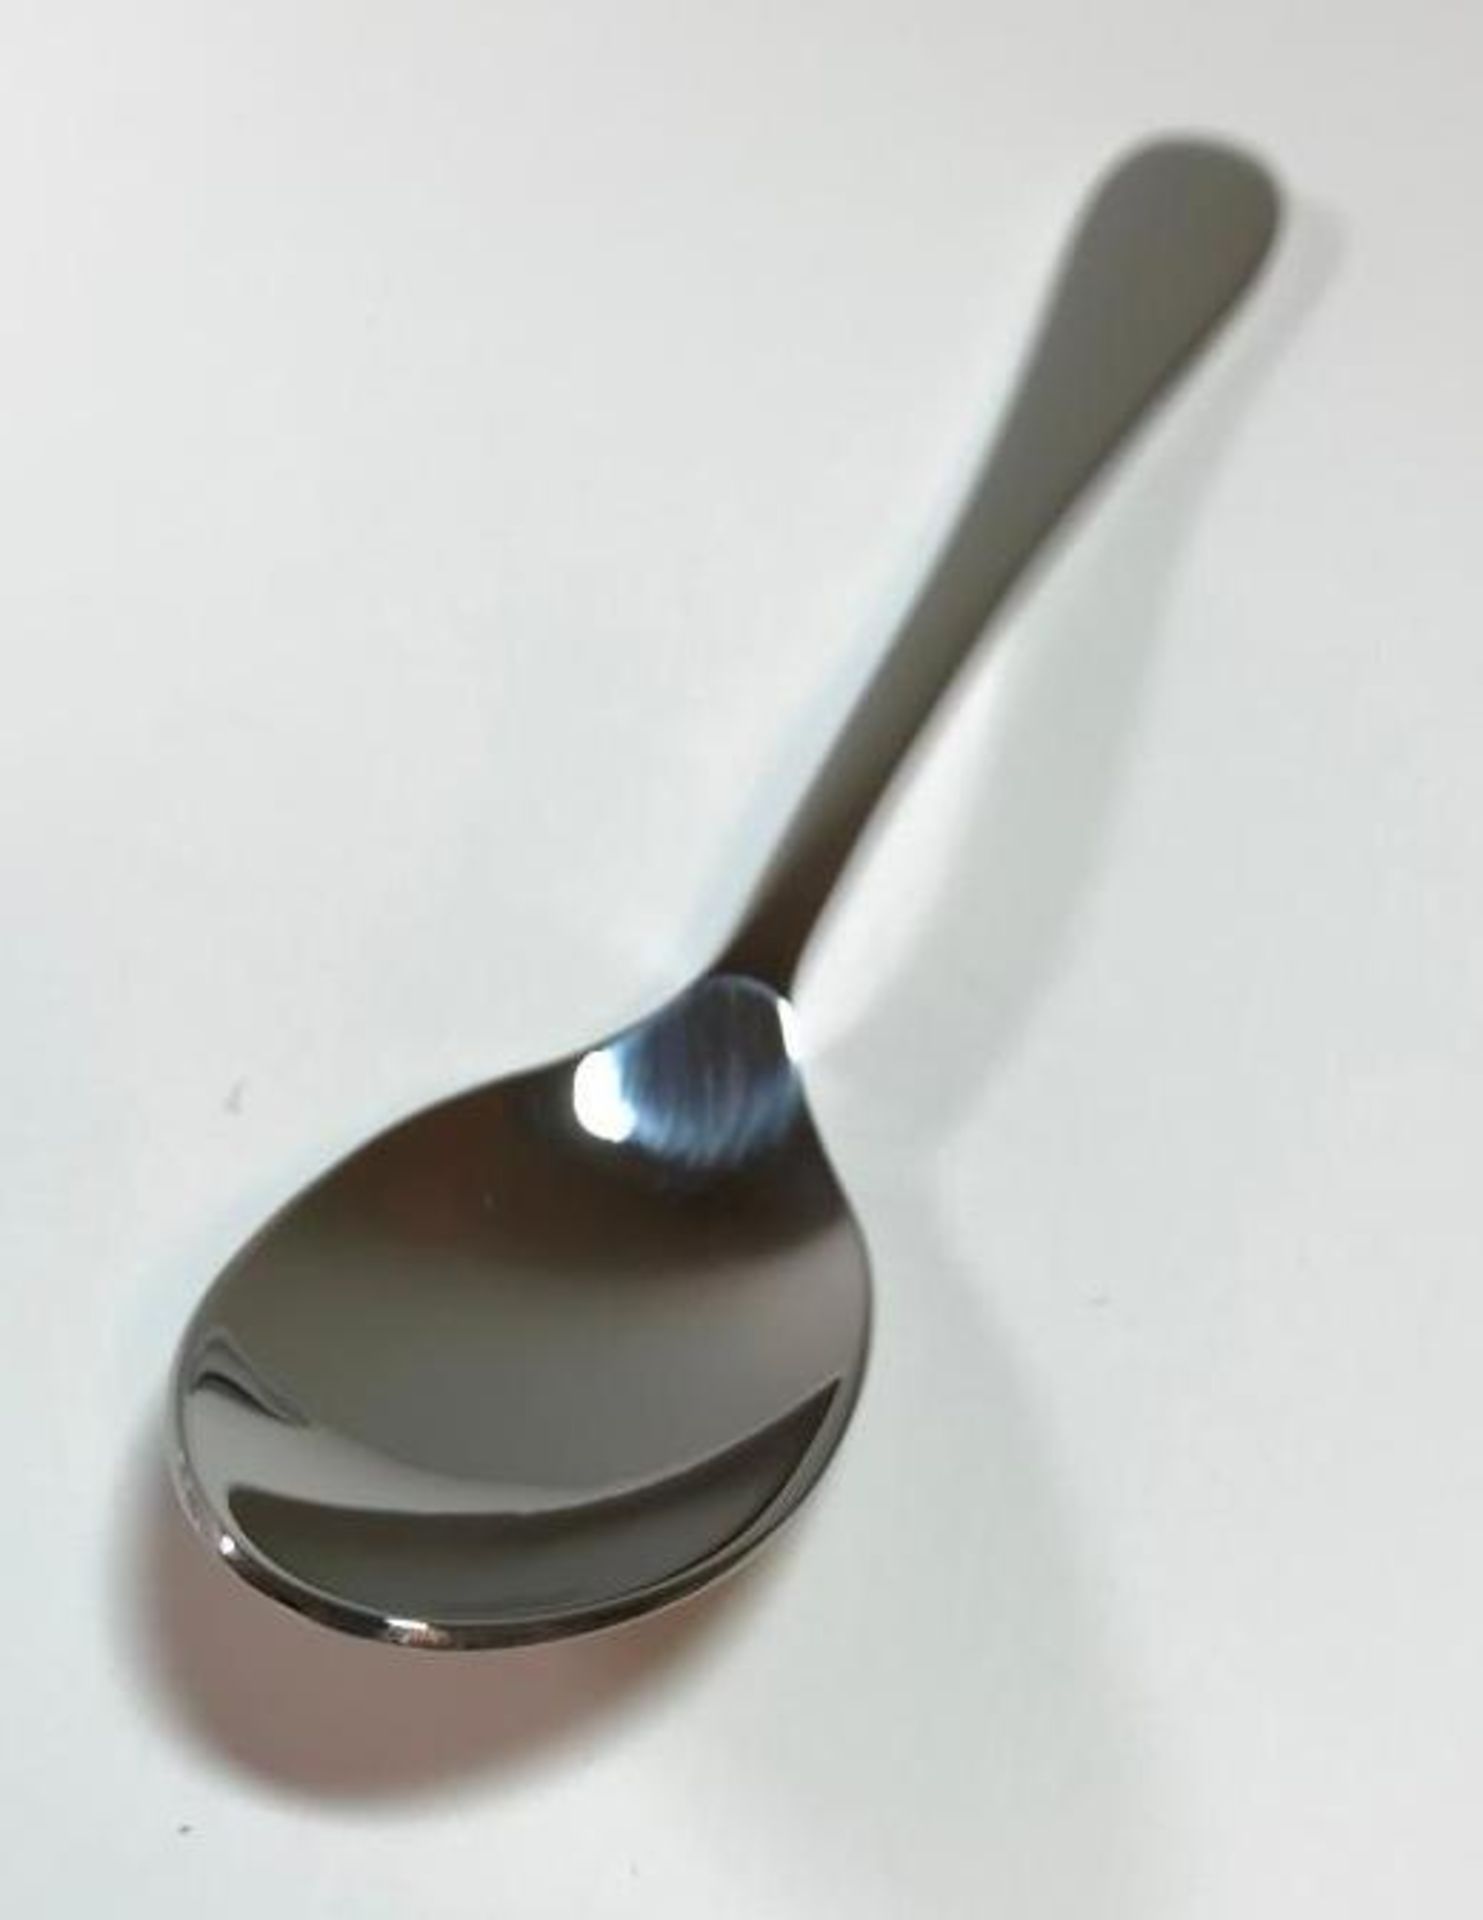 DUDSON EQUUS 4.5" COFFEE SPOON - 12/CASE - NEW - Image 3 of 5